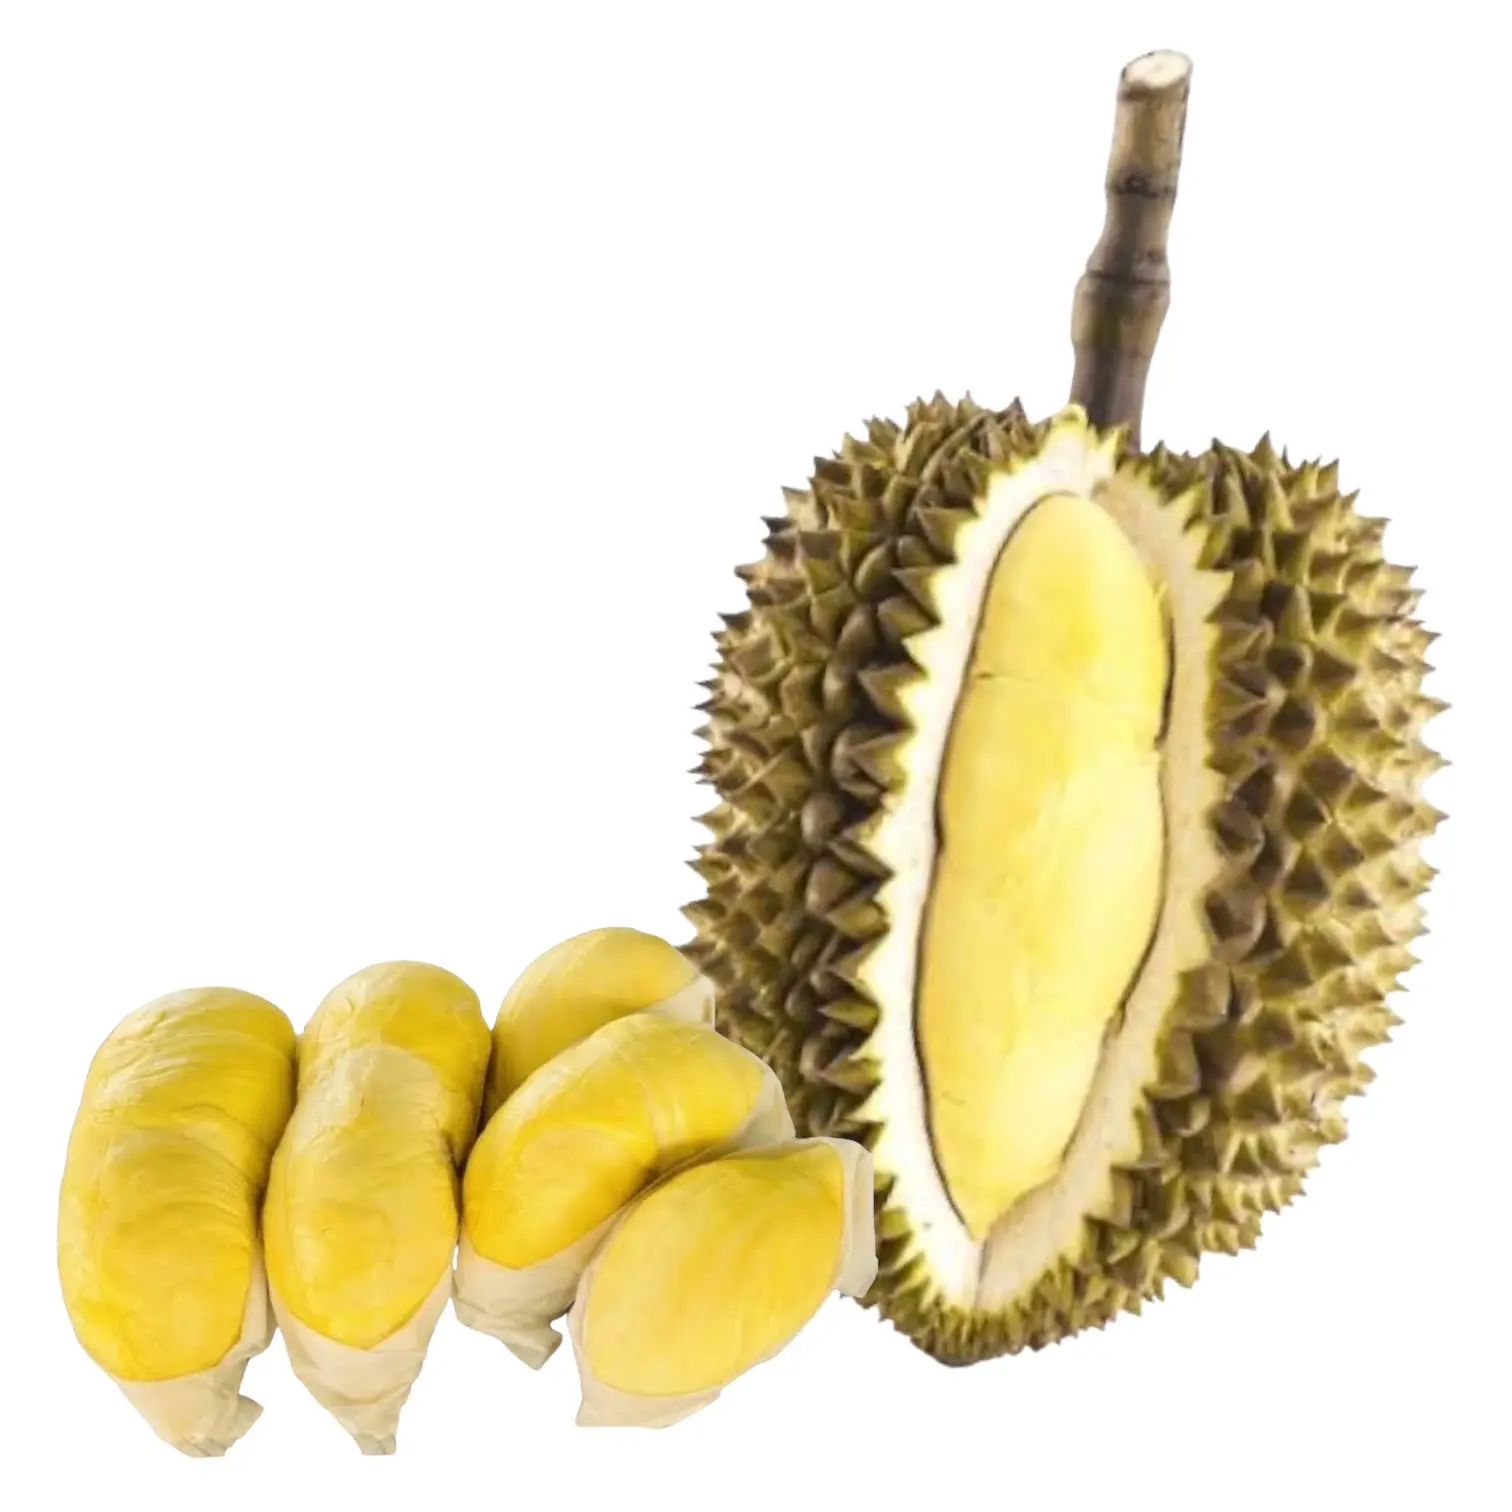 Sweet Fresh Durians Monthong from Thailand Fresh Durian Fruit for sale Small Seed Durian Fruit Export Grade Pack 500g